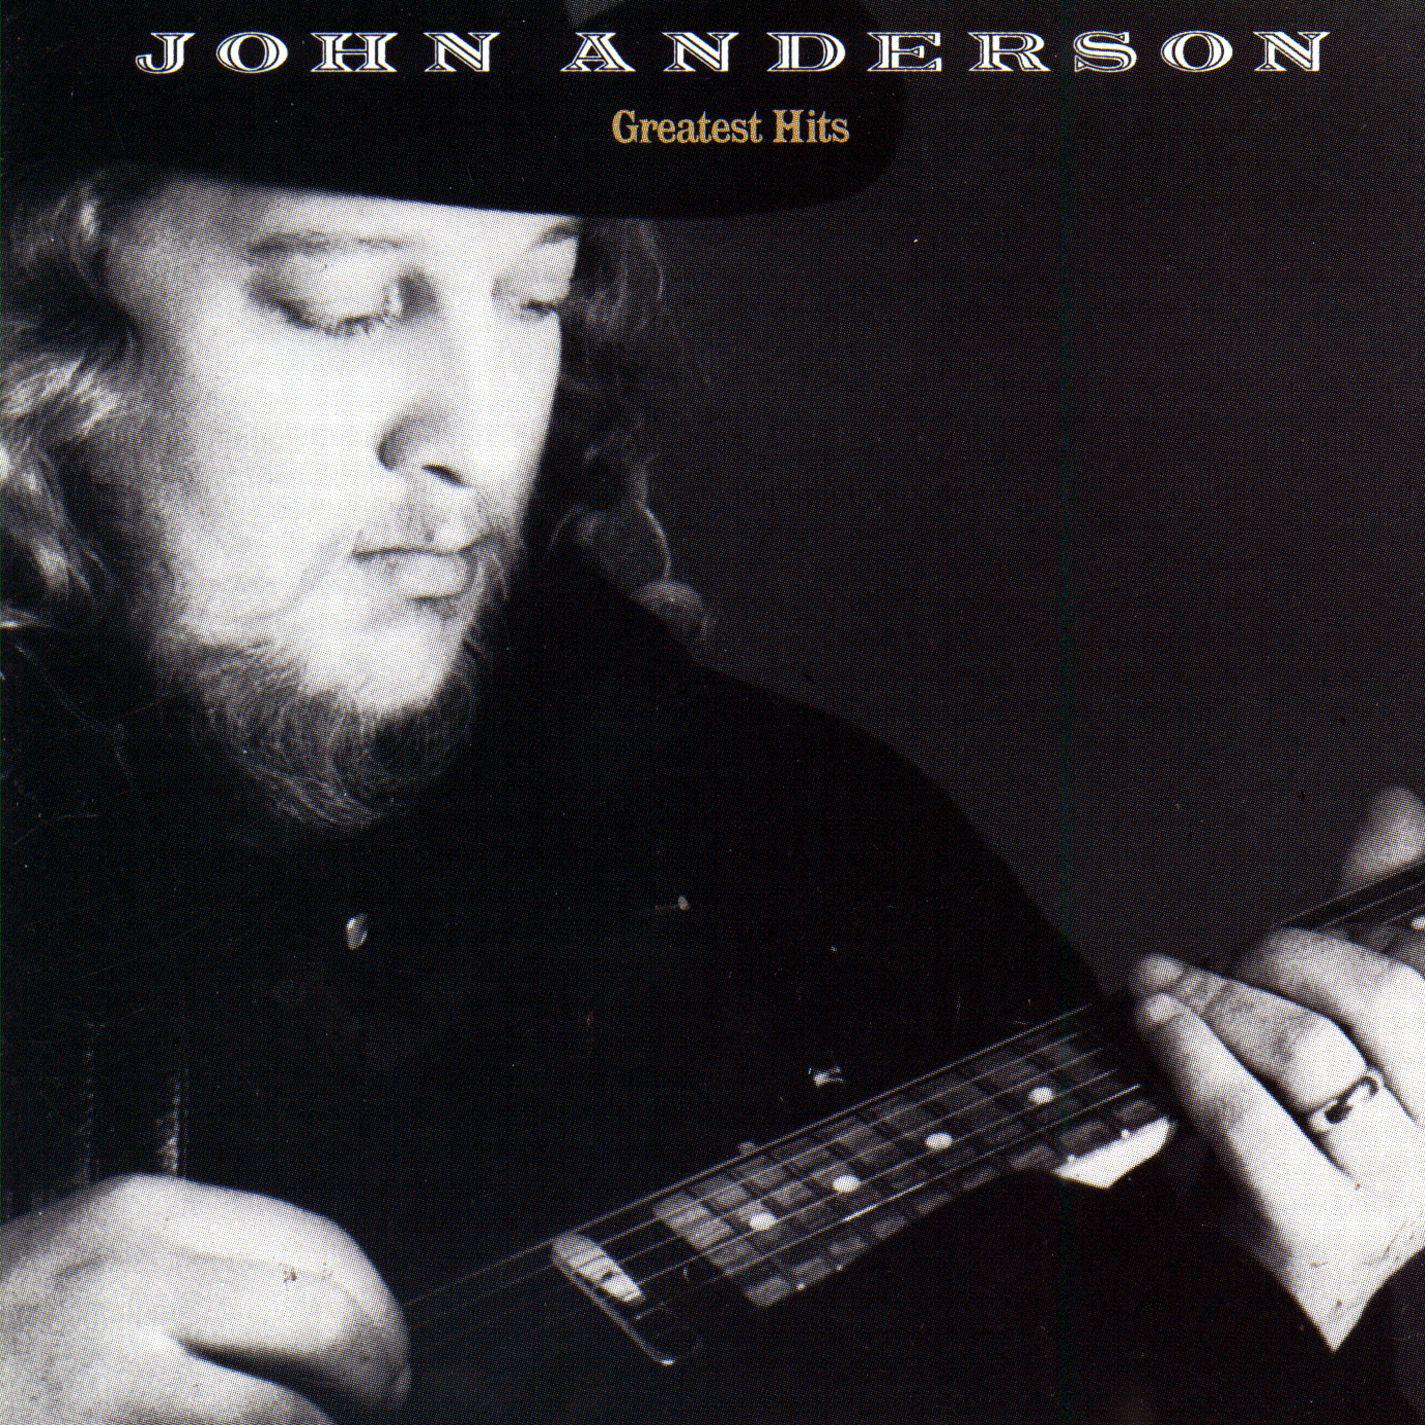 John Anderson - I'm Just an Old Chunk of Coal (But I'm Gonna Be a Diamond Some Day)